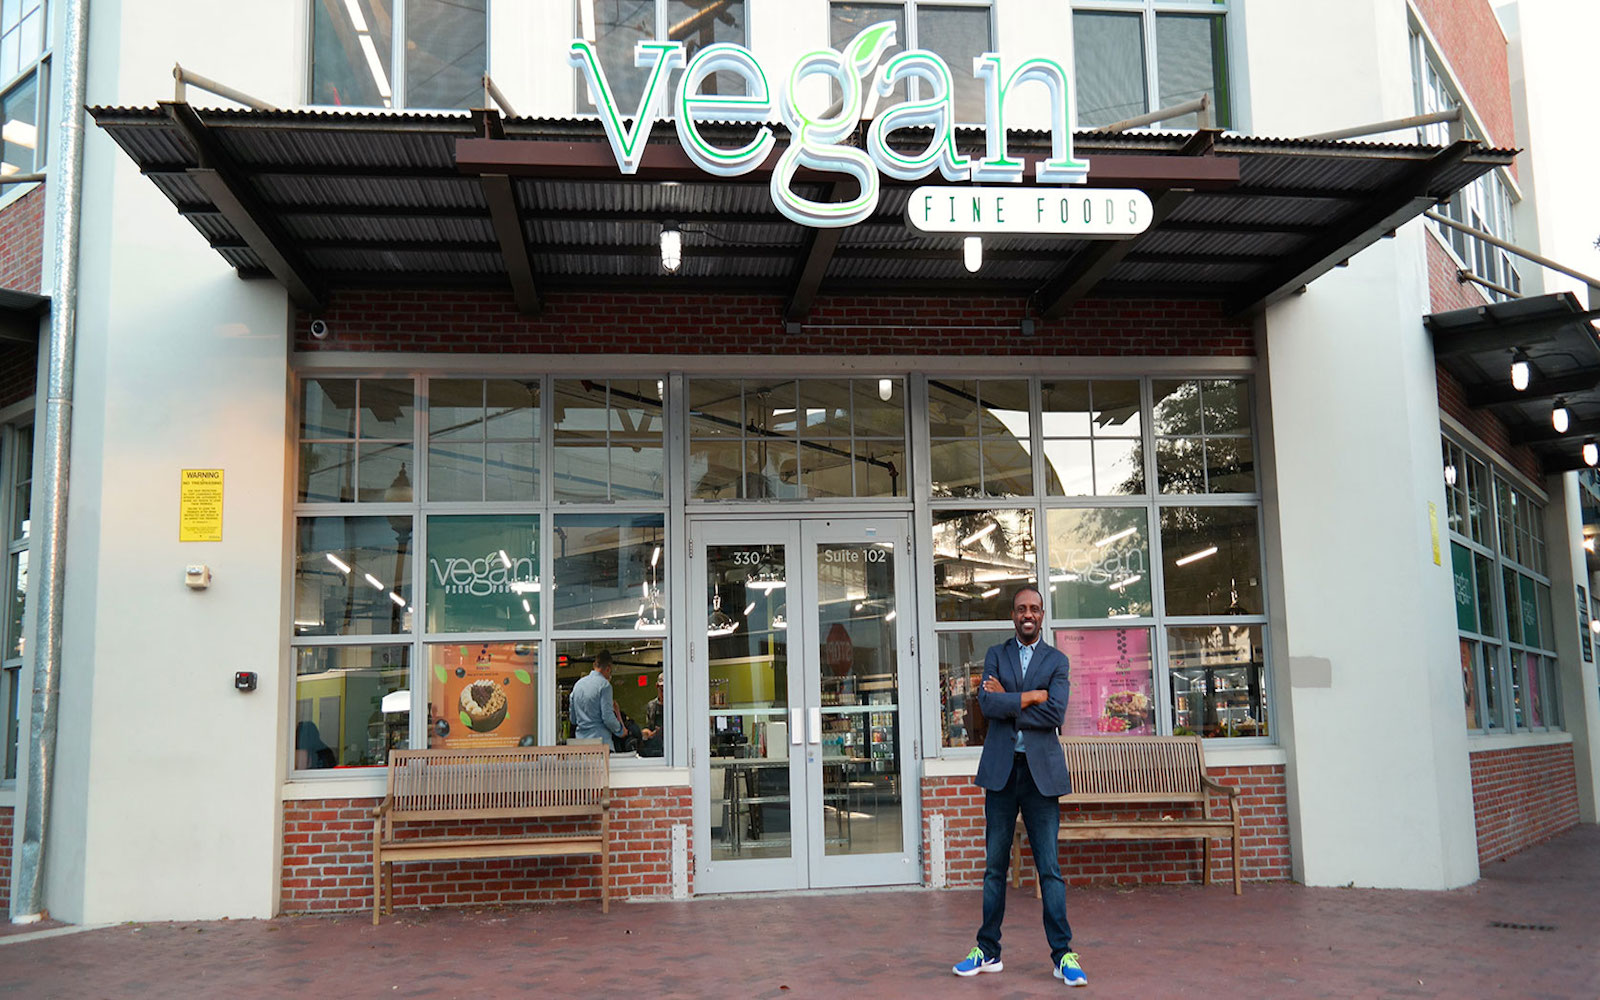 Founder of Vegan Fine Foods standing in front of his store